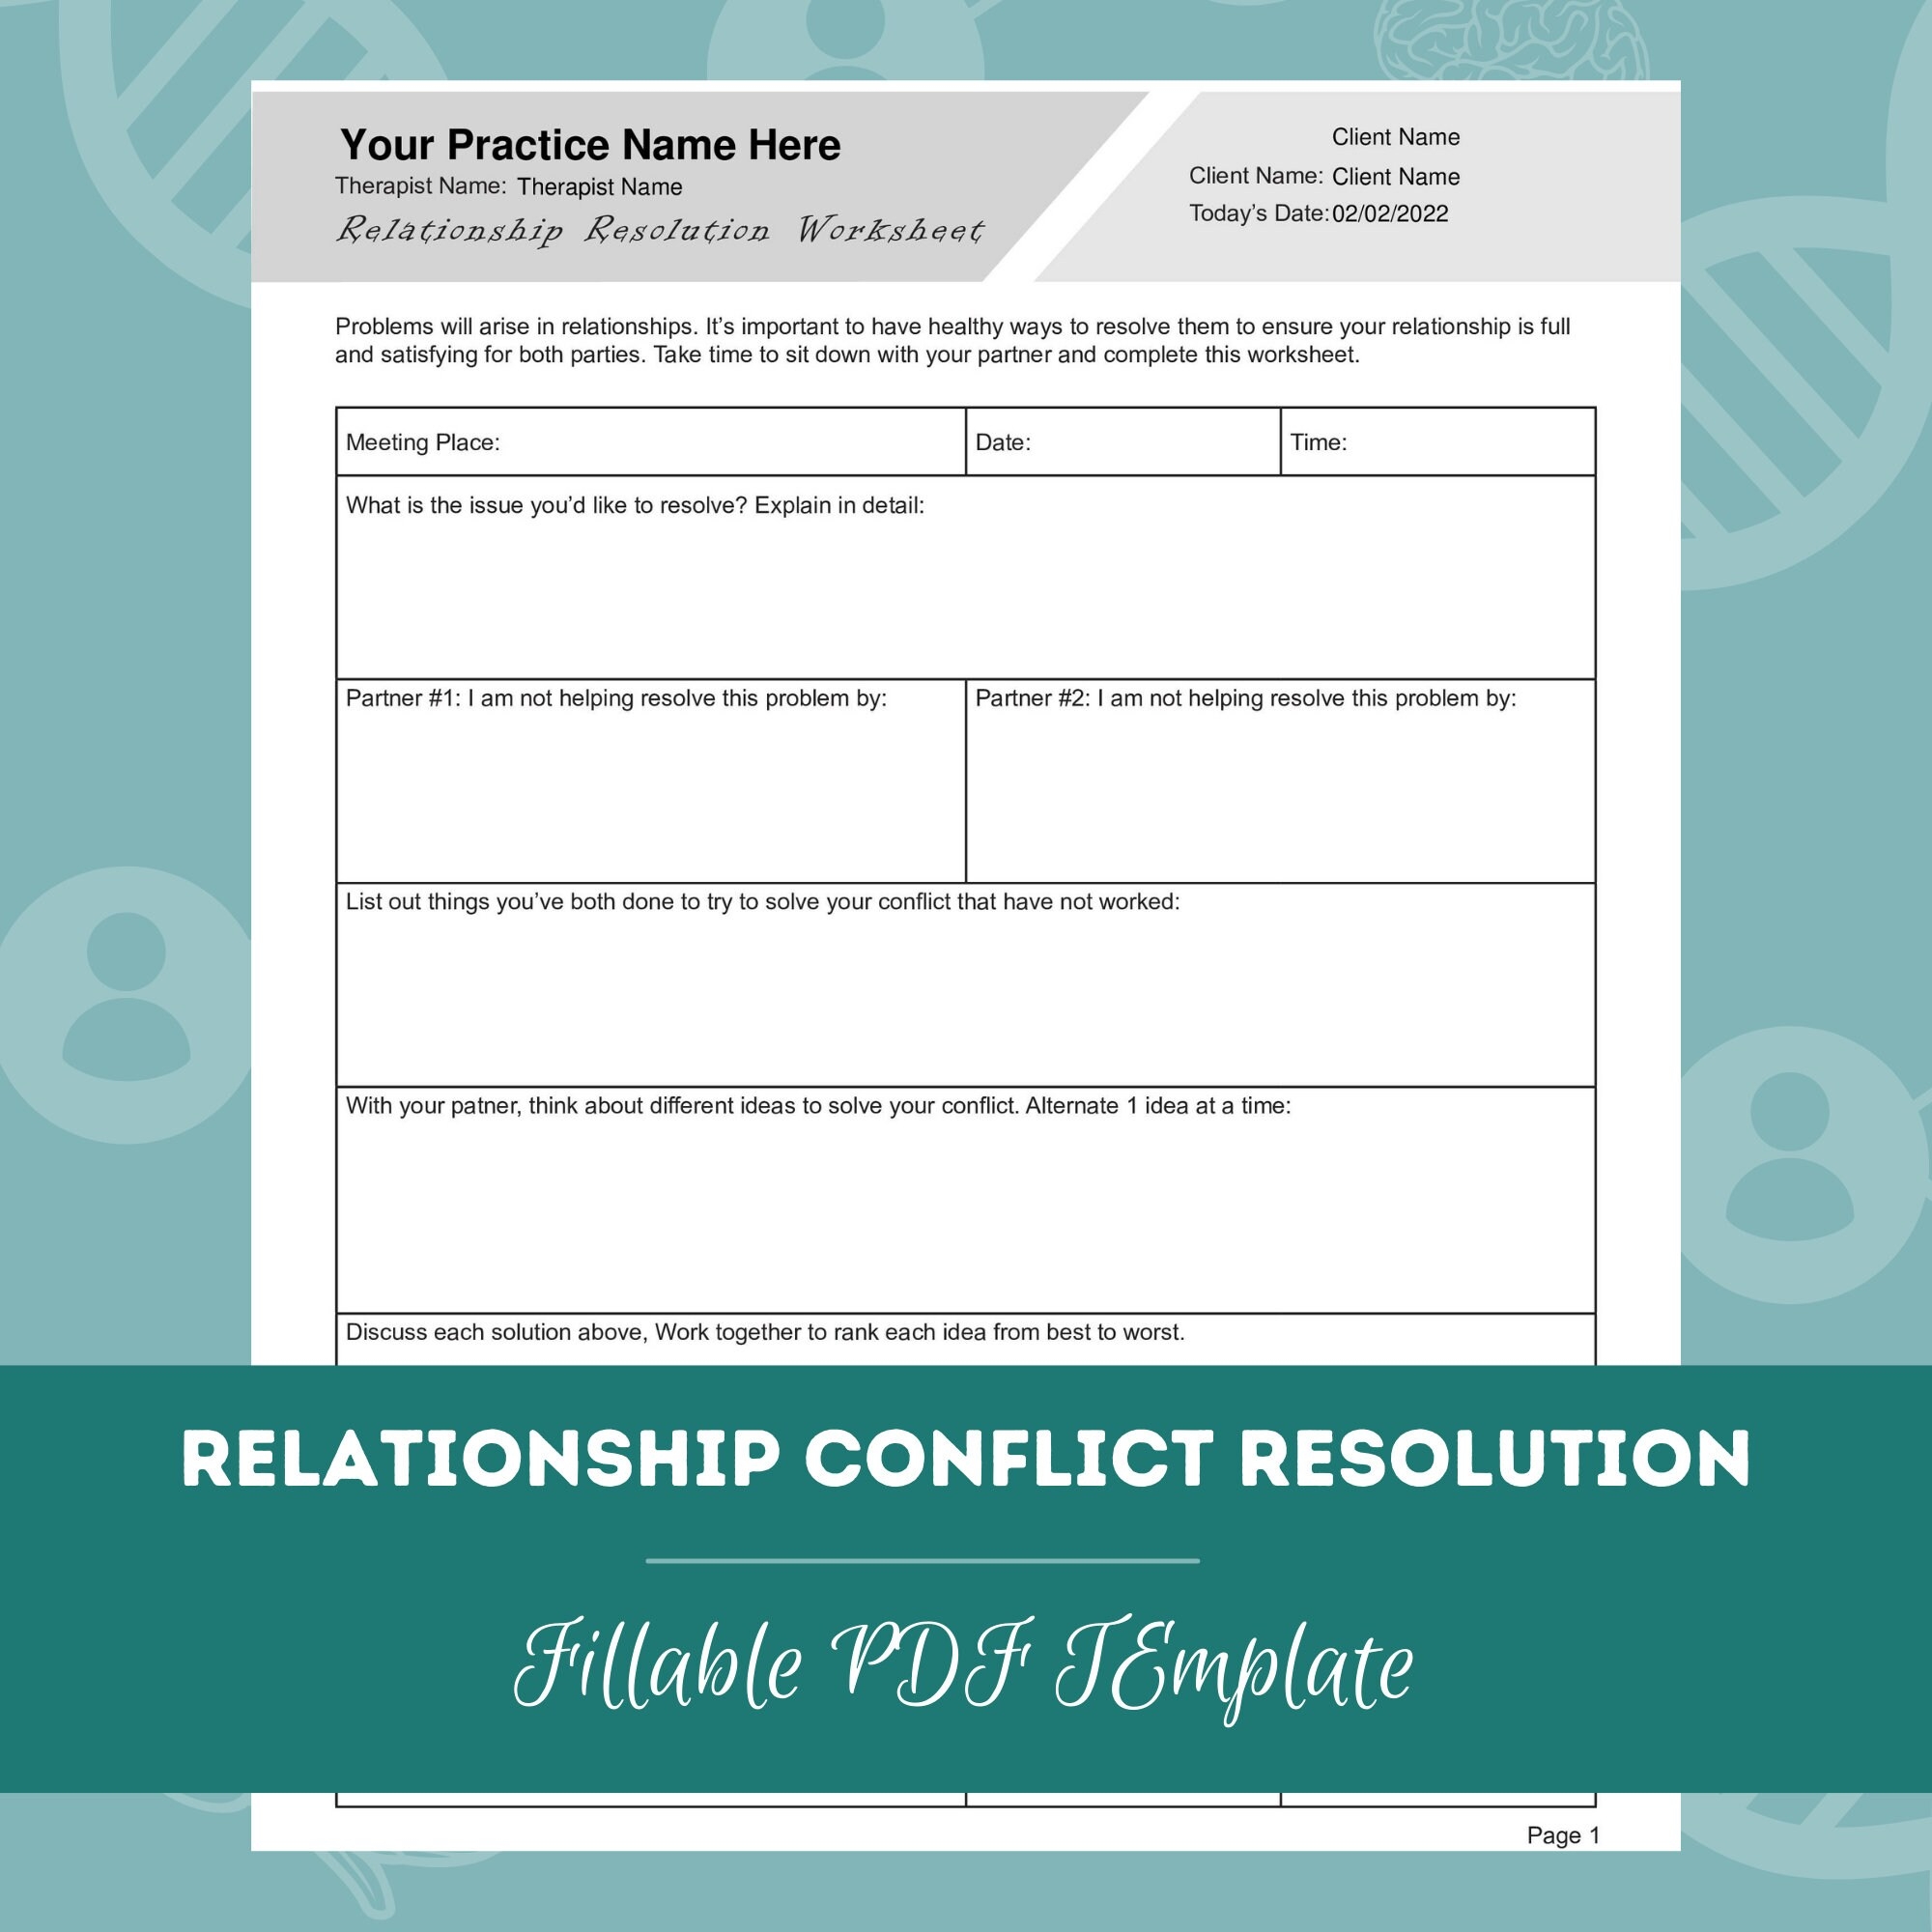 Conflict Resolution Worksheets Bundle Editable Fillable Printable PDF Templates Counselors Psychologists Psychiatrists Therapists Etsy